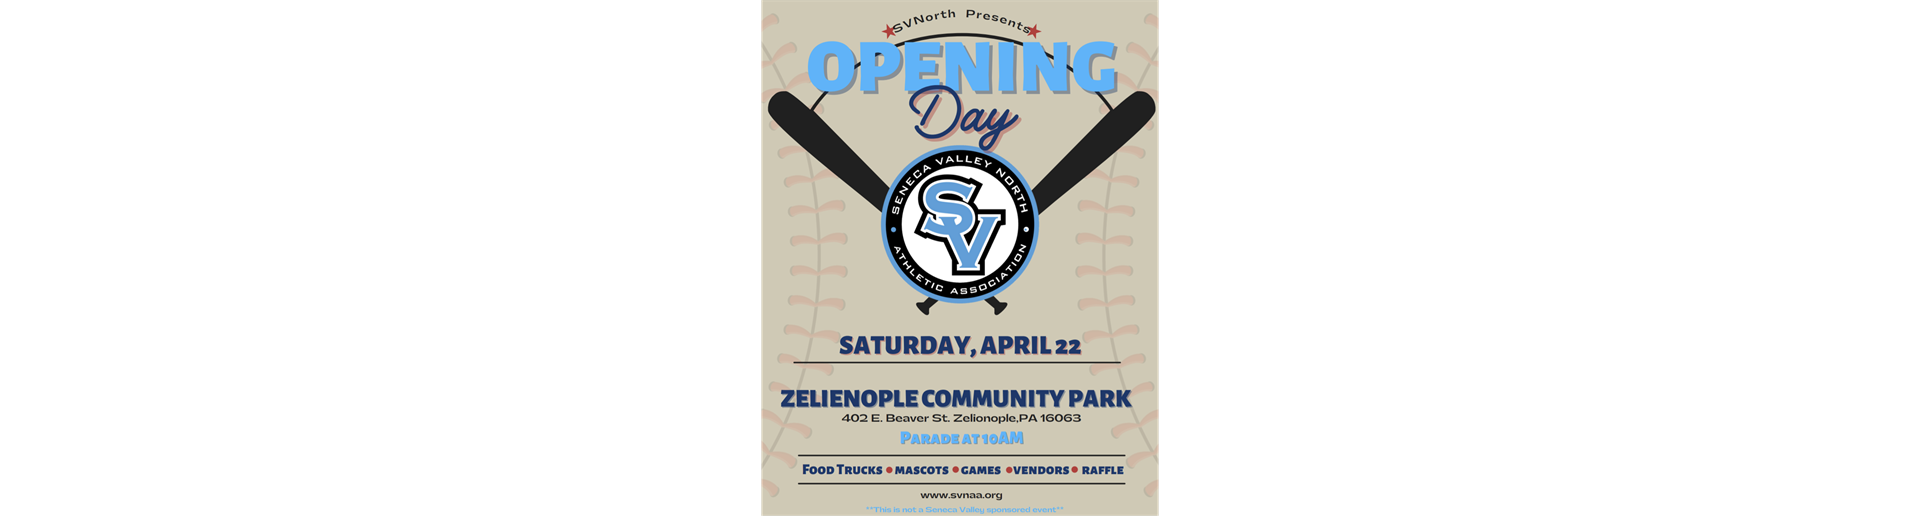 Opening Day - April 22 